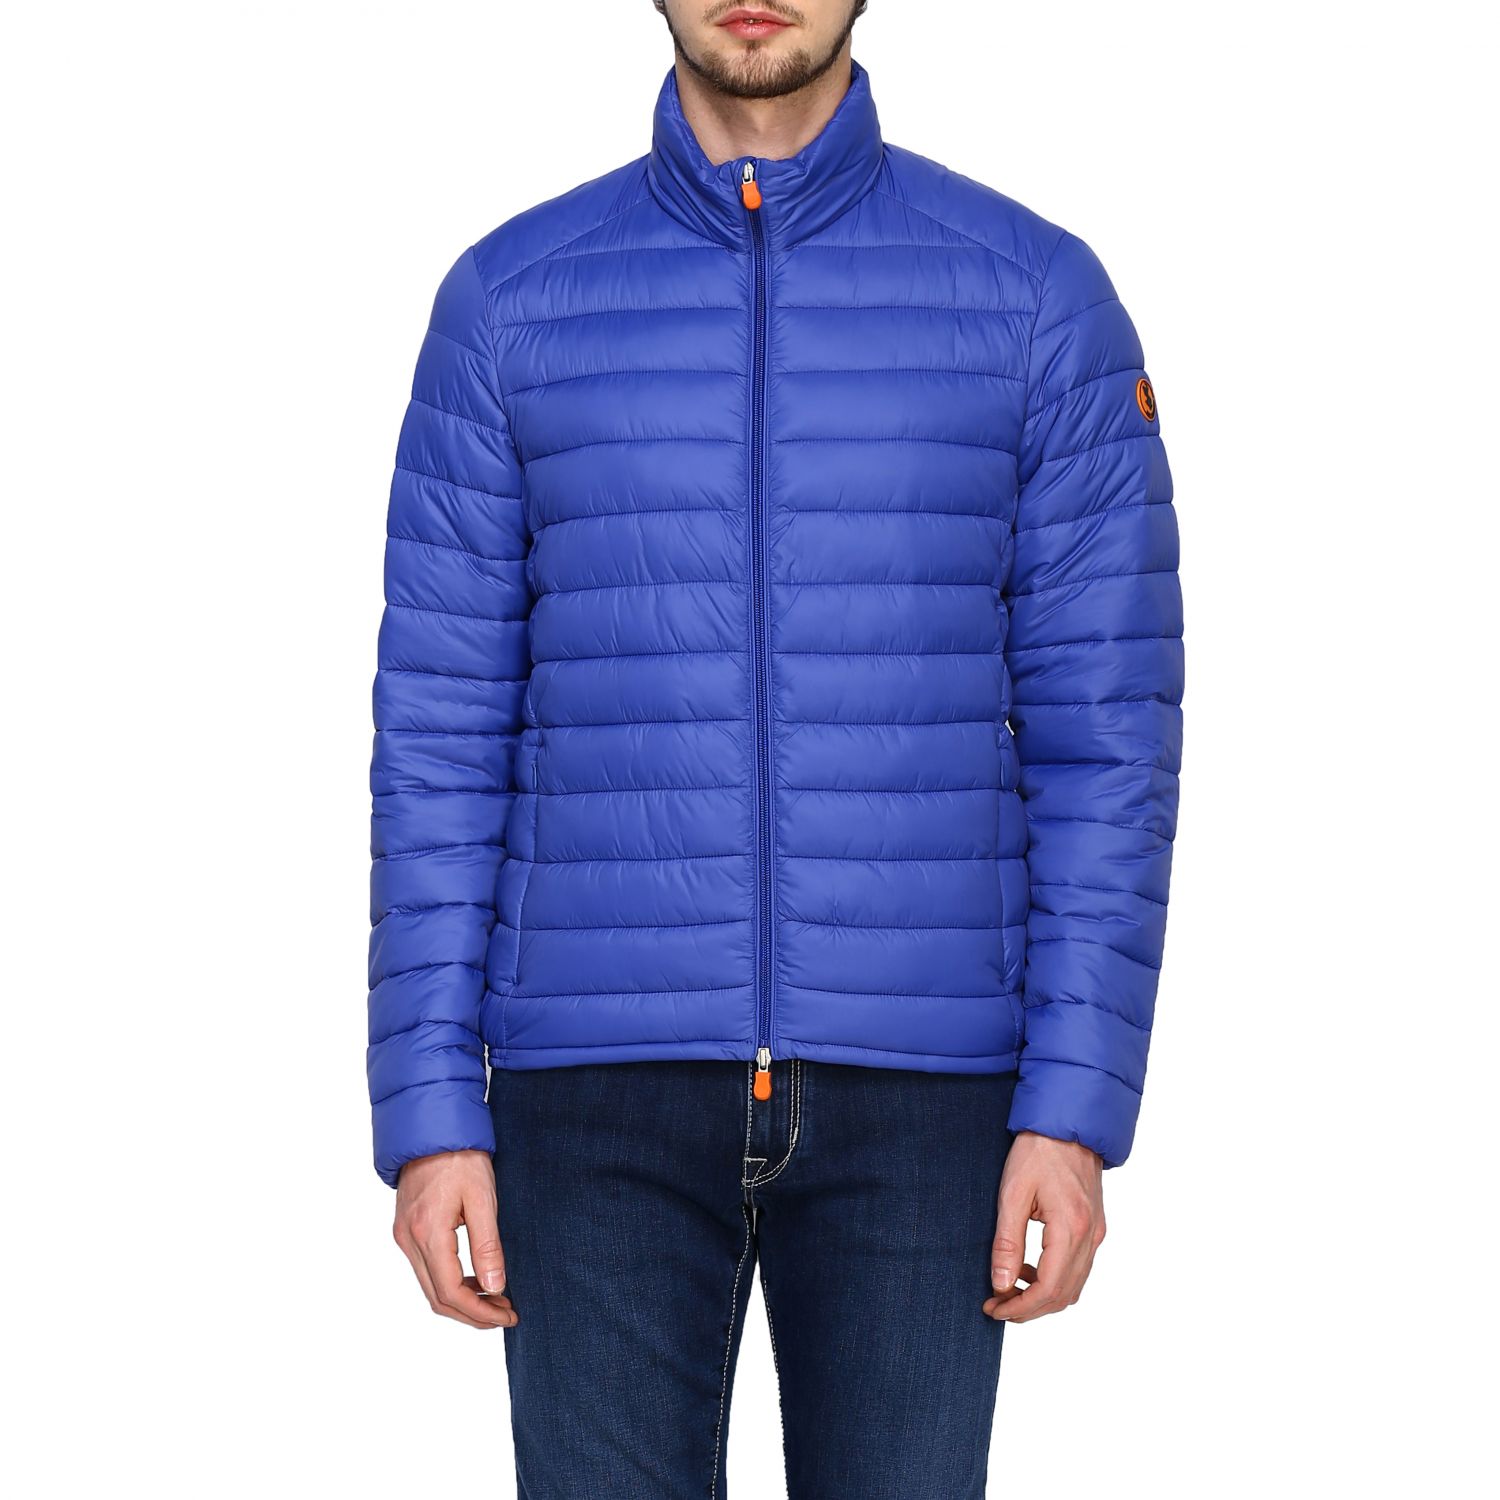 Save The Duck Outlet: Jacket men - Royal Blue | Jacket Save The Duck ...